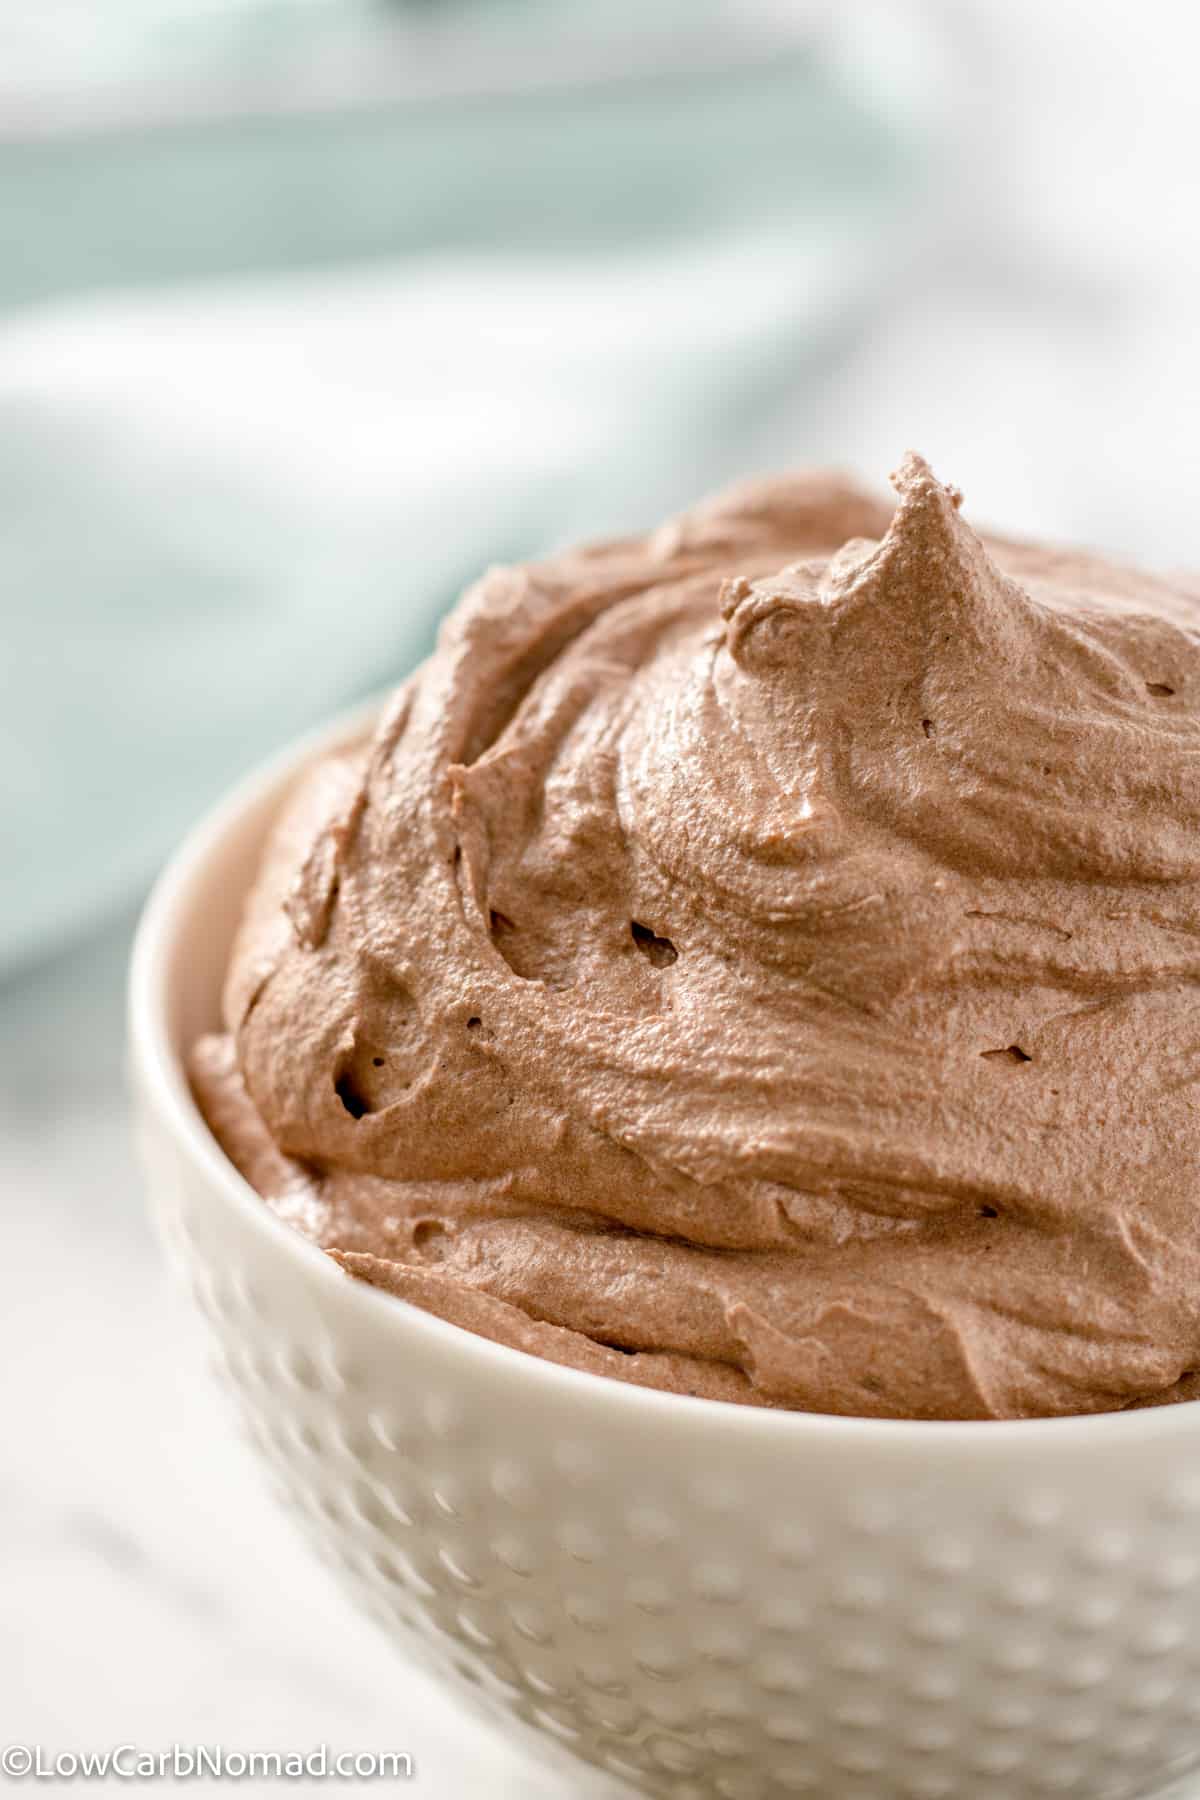 Sugar free chocolate buttercream Frosting in a bowl